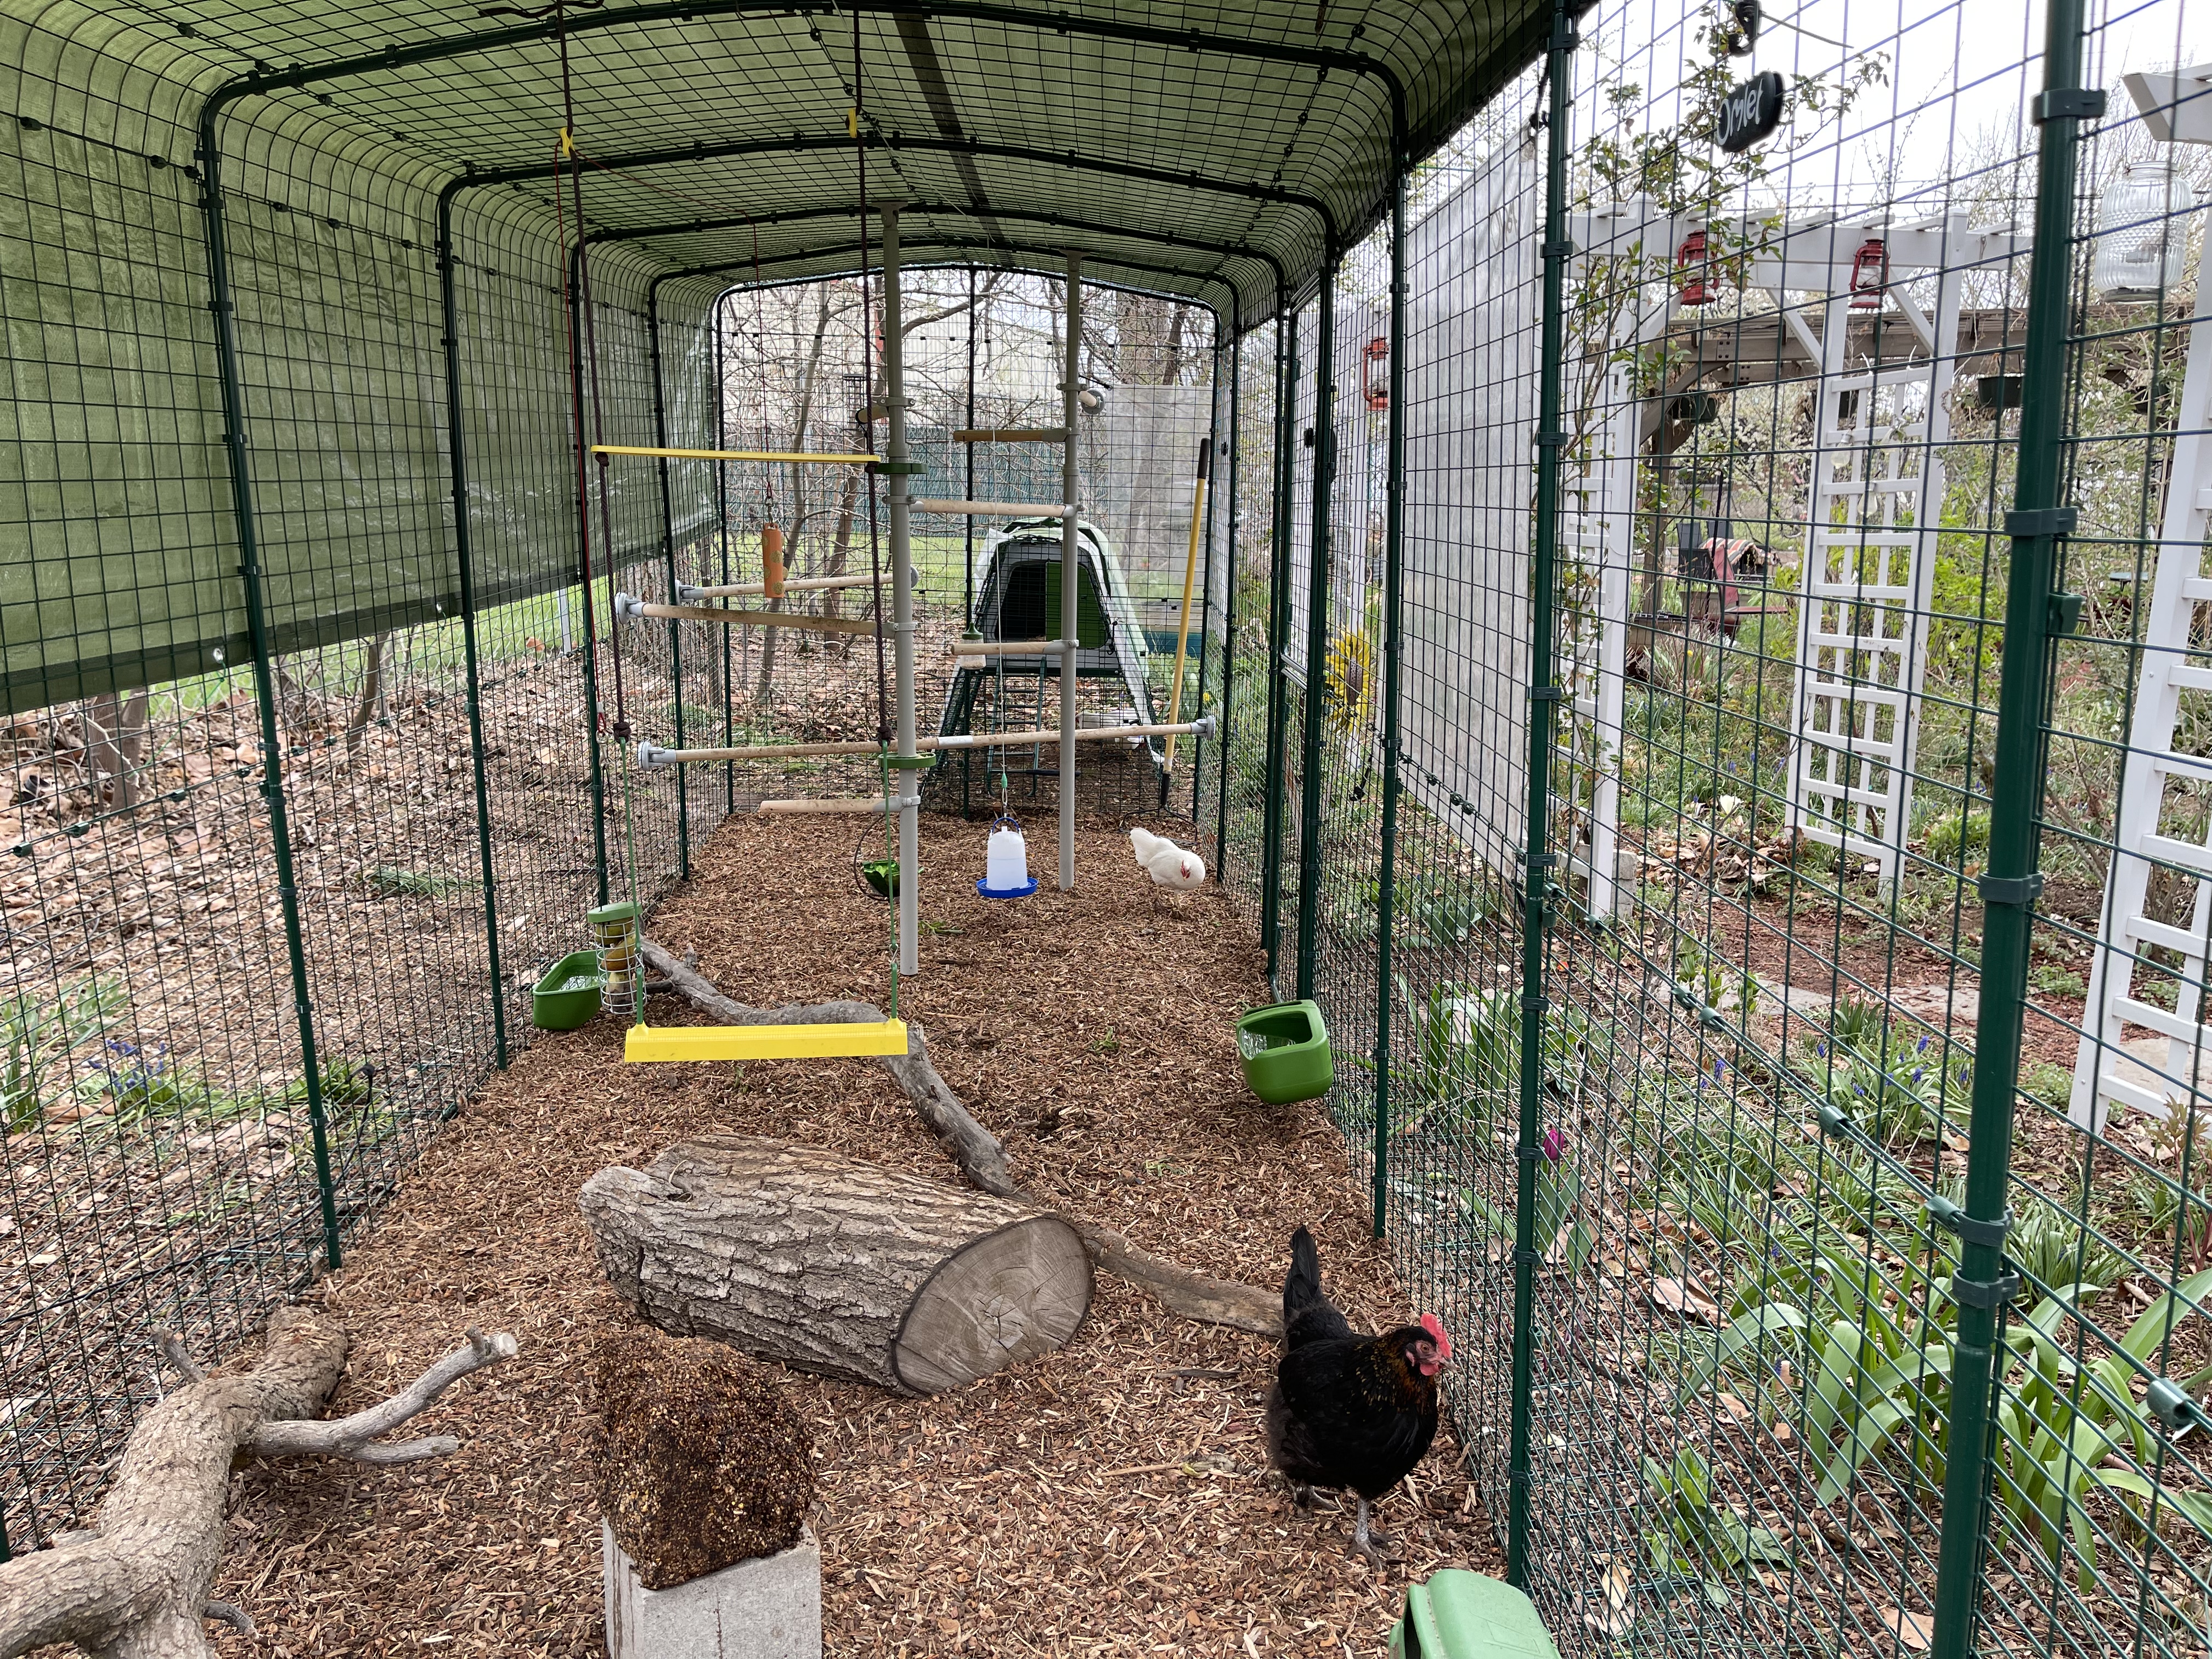 A large chicken run connected to a green coop, including may chicken perches and a chicken swing